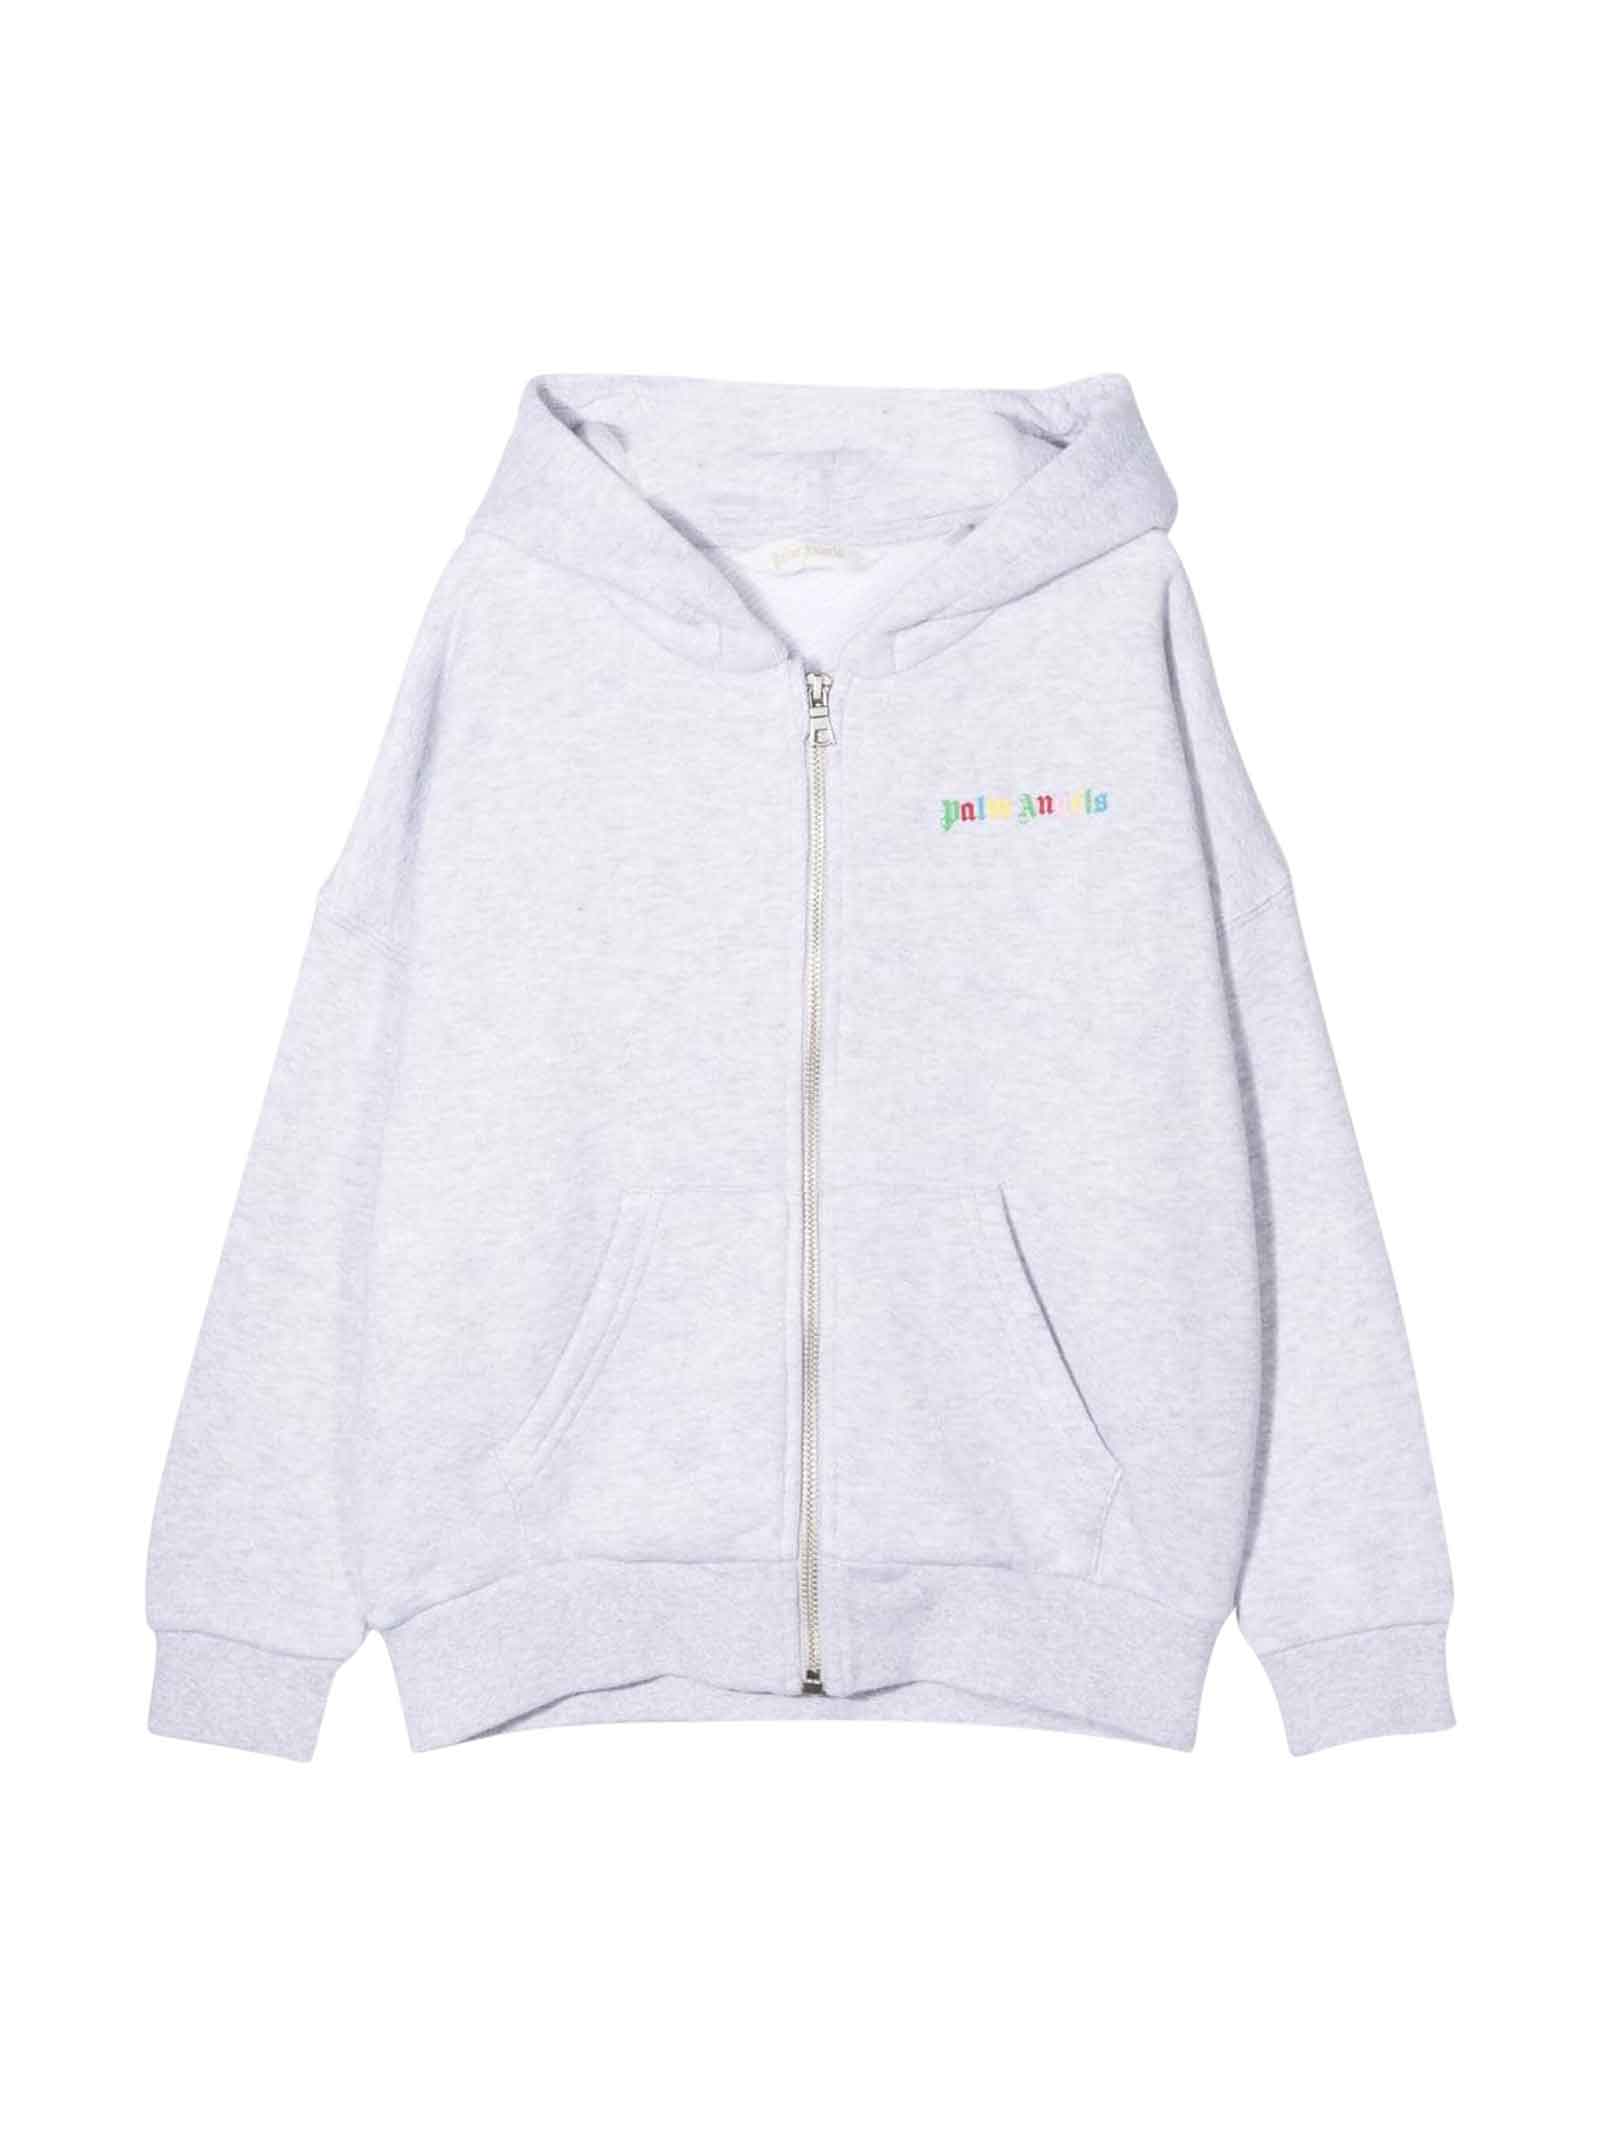 Palm Angels White Sweatshirt With Zip And Multicolor Print